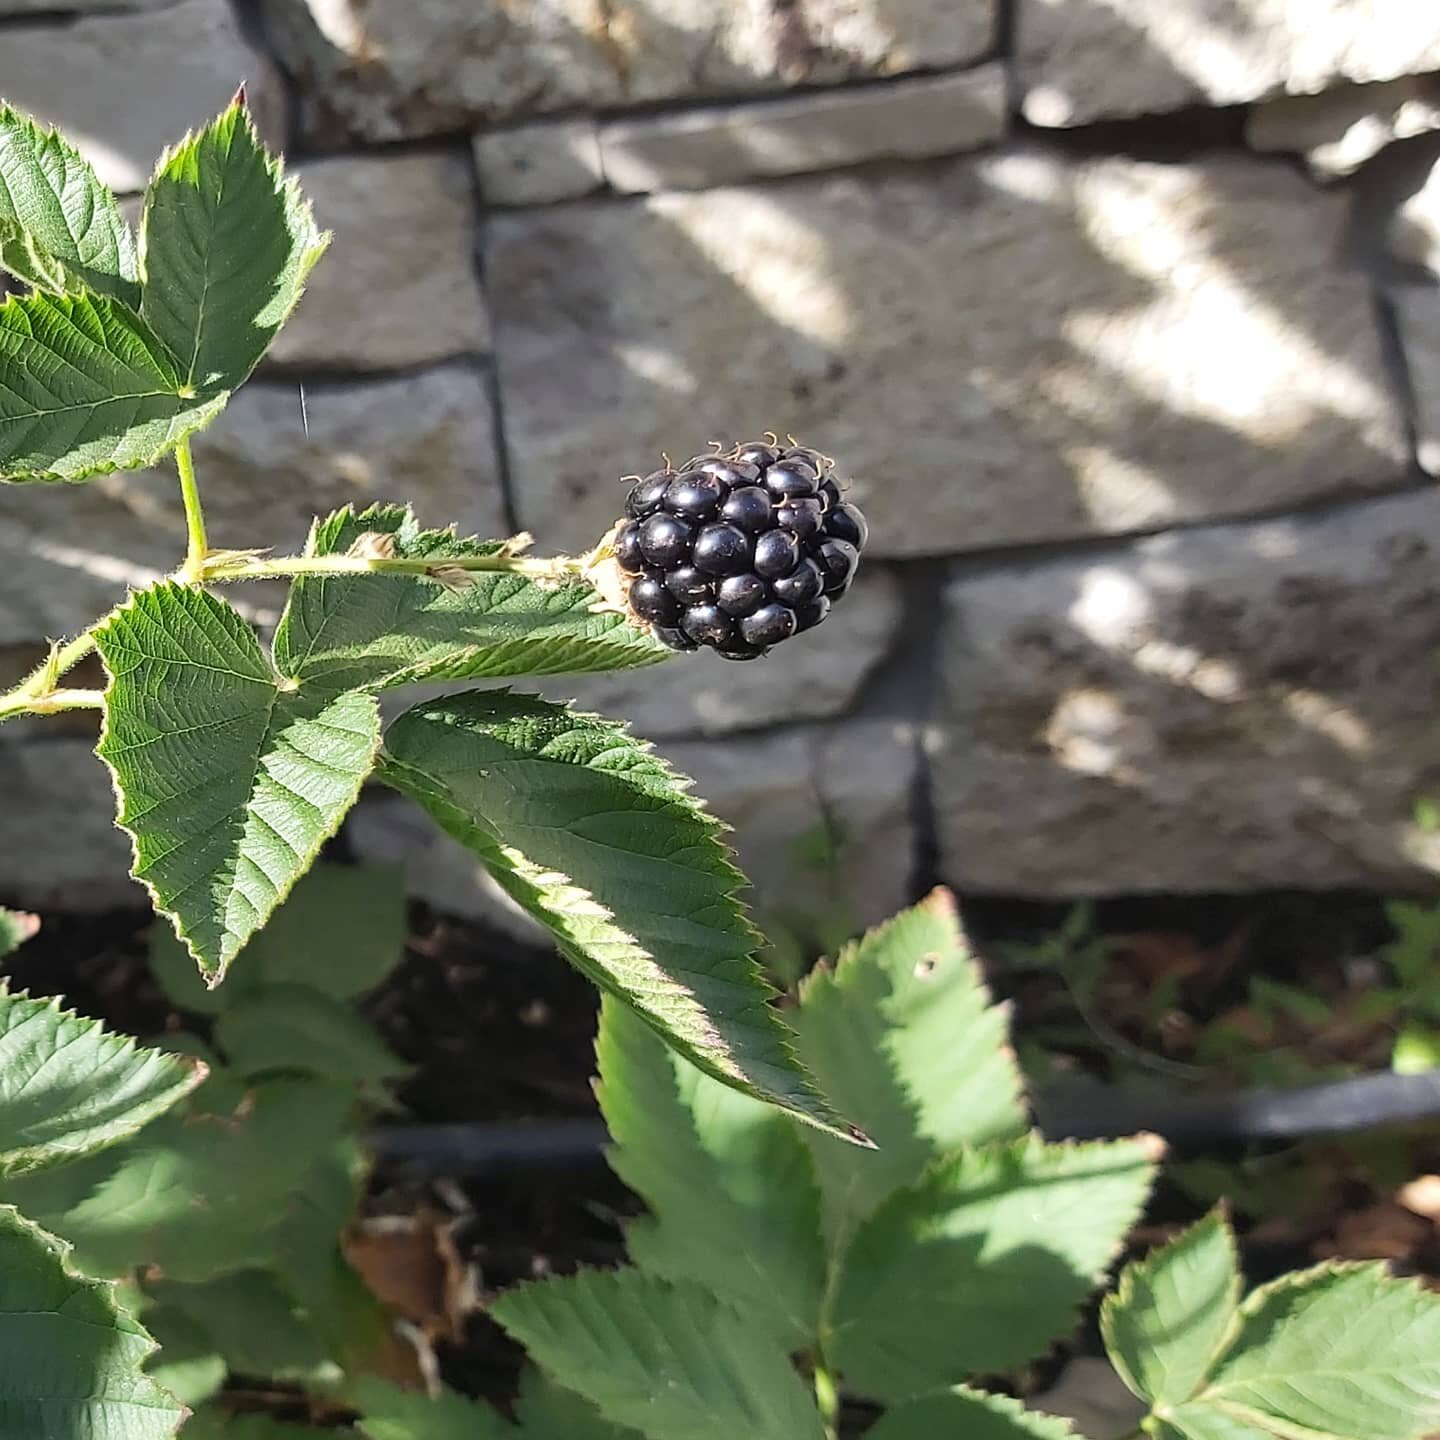 Two years of blood, sweat and pampering and I finally have my first and only blackberry!
#drgreenthumb #massiveyeilds #gardeningforthesoul